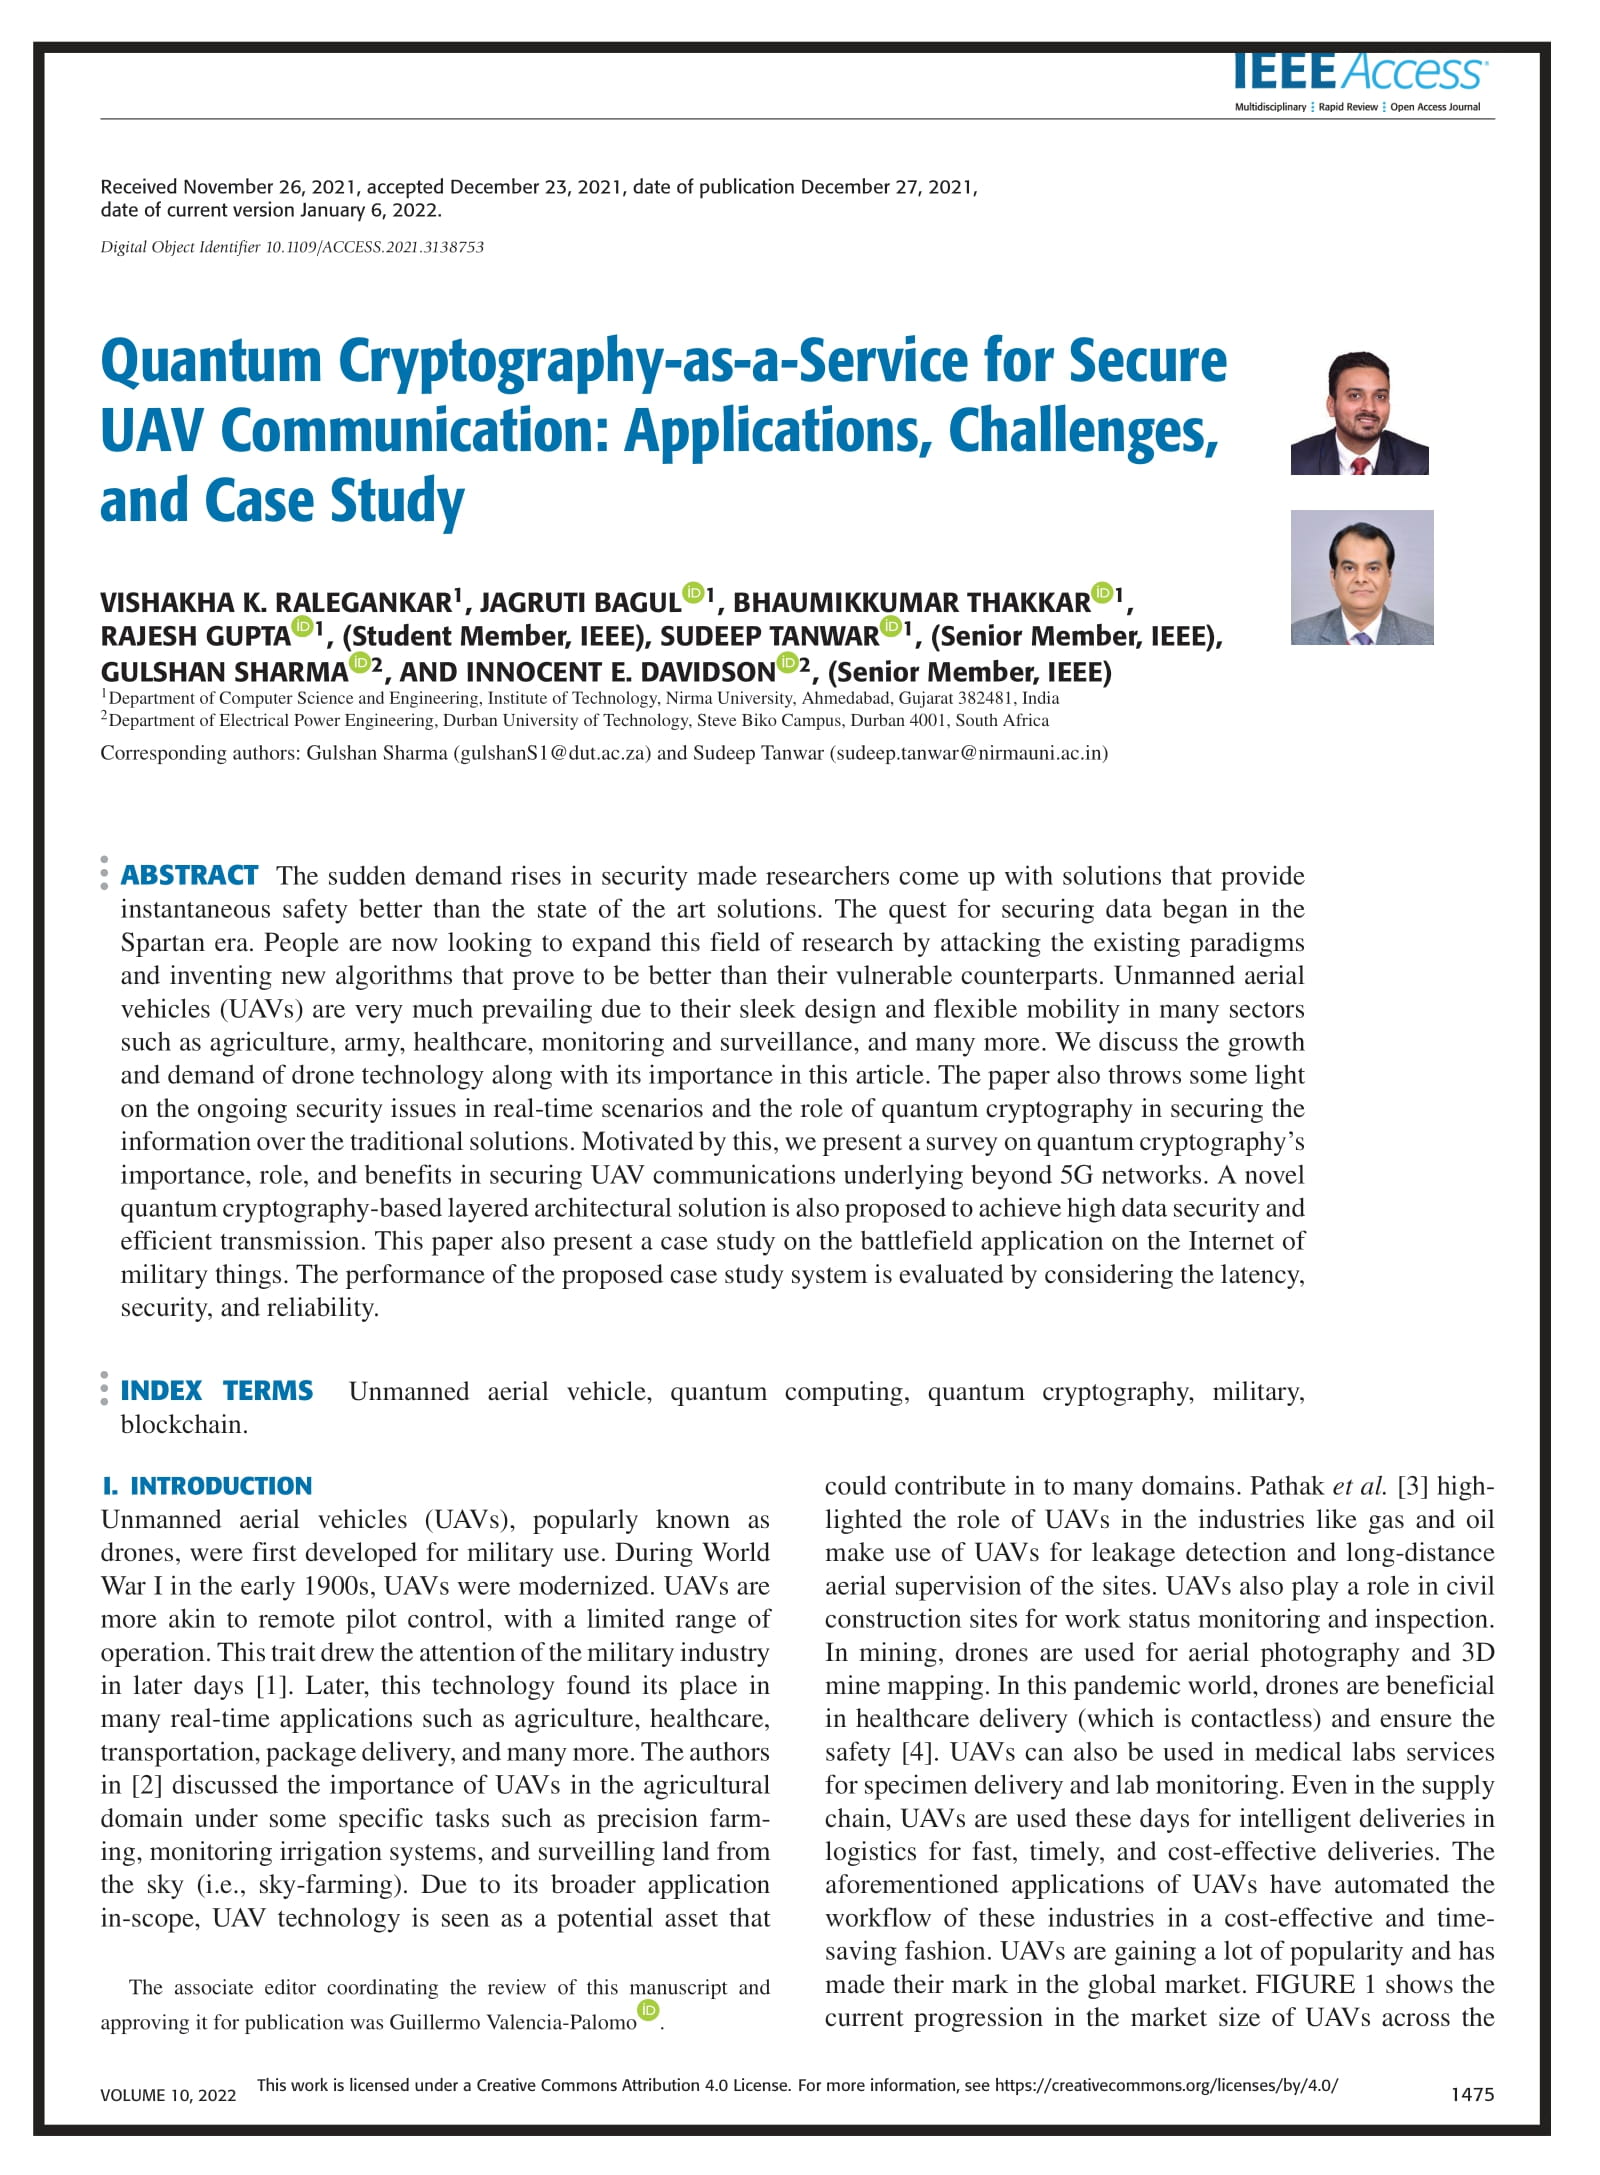 Quantum Cryptography-as-a-Service for Secure UAV Communication: Applications, Challenges, and Case Study